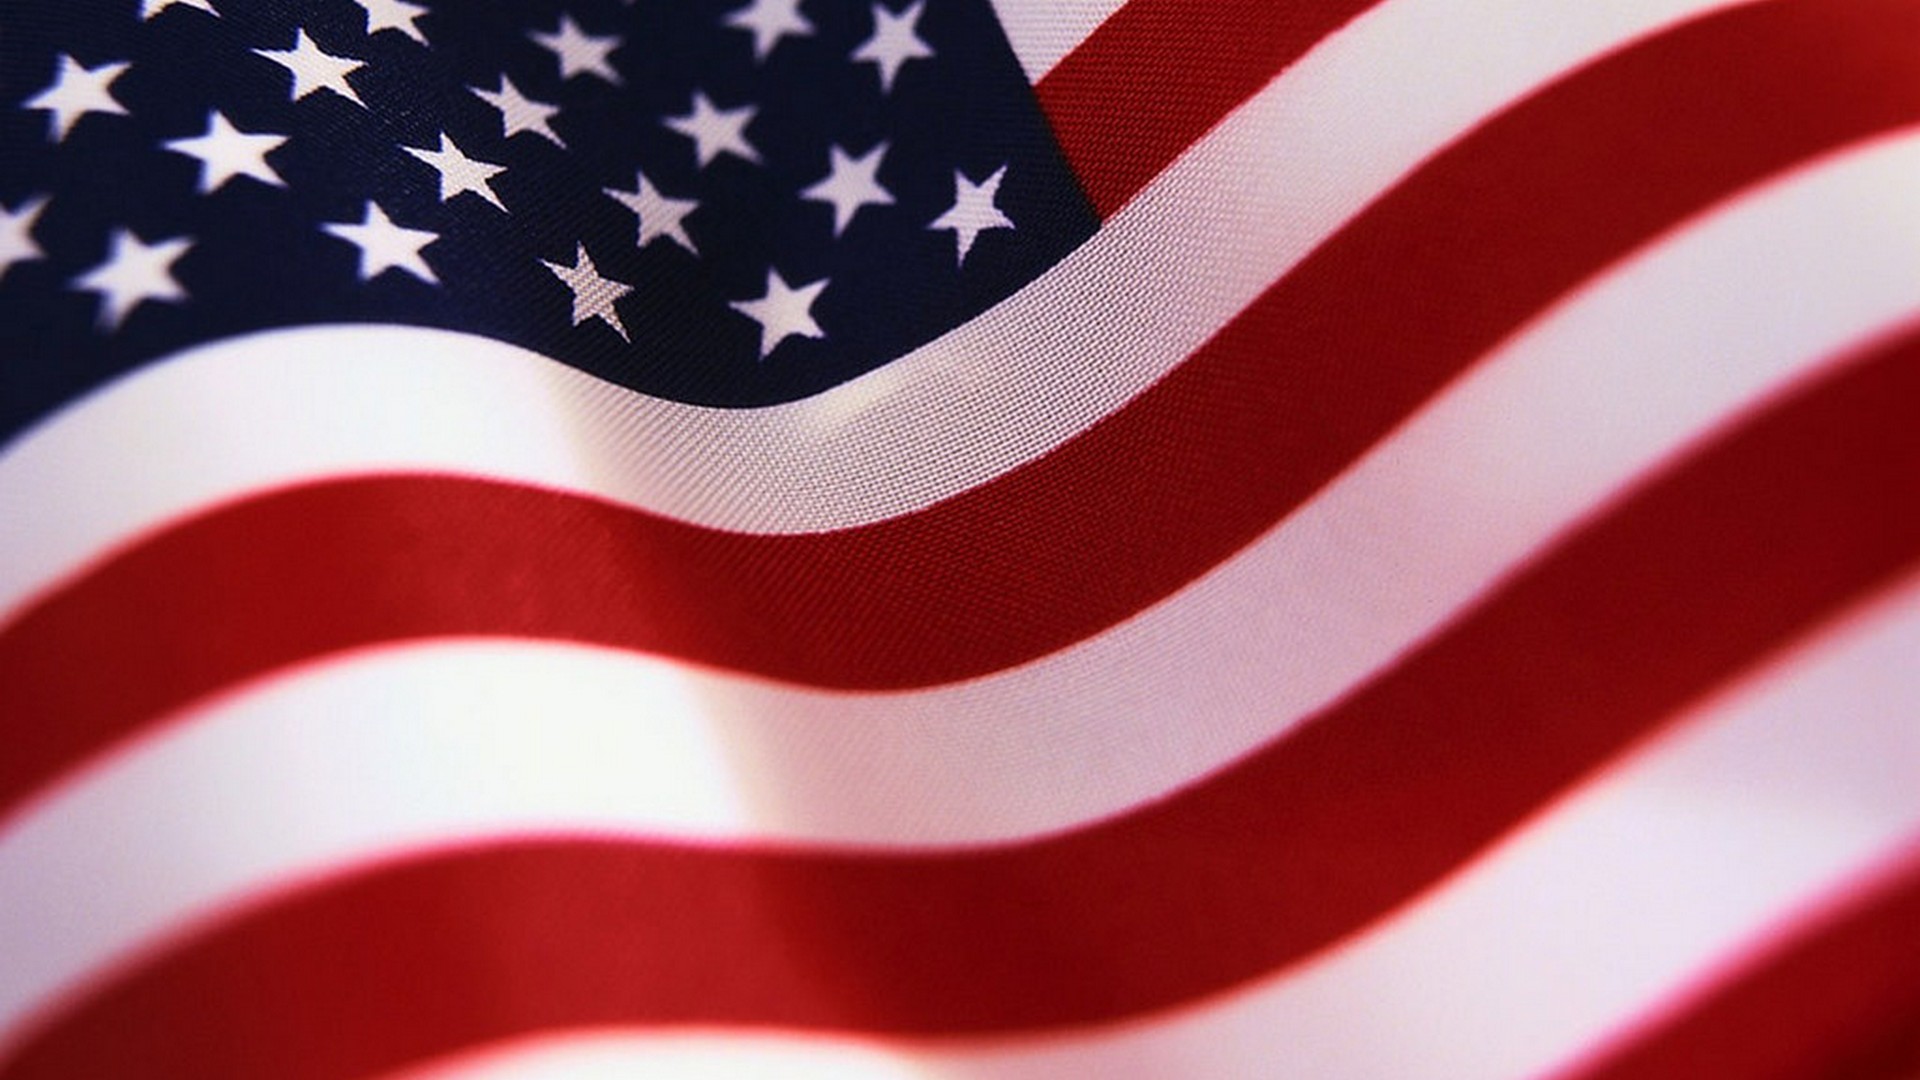 Best American Flag Wallpaper With high-resolution 1920X1080 pixel. You can use this wallpaper for your Windows and Mac OS computers as well as your Android and iPhone smartphones